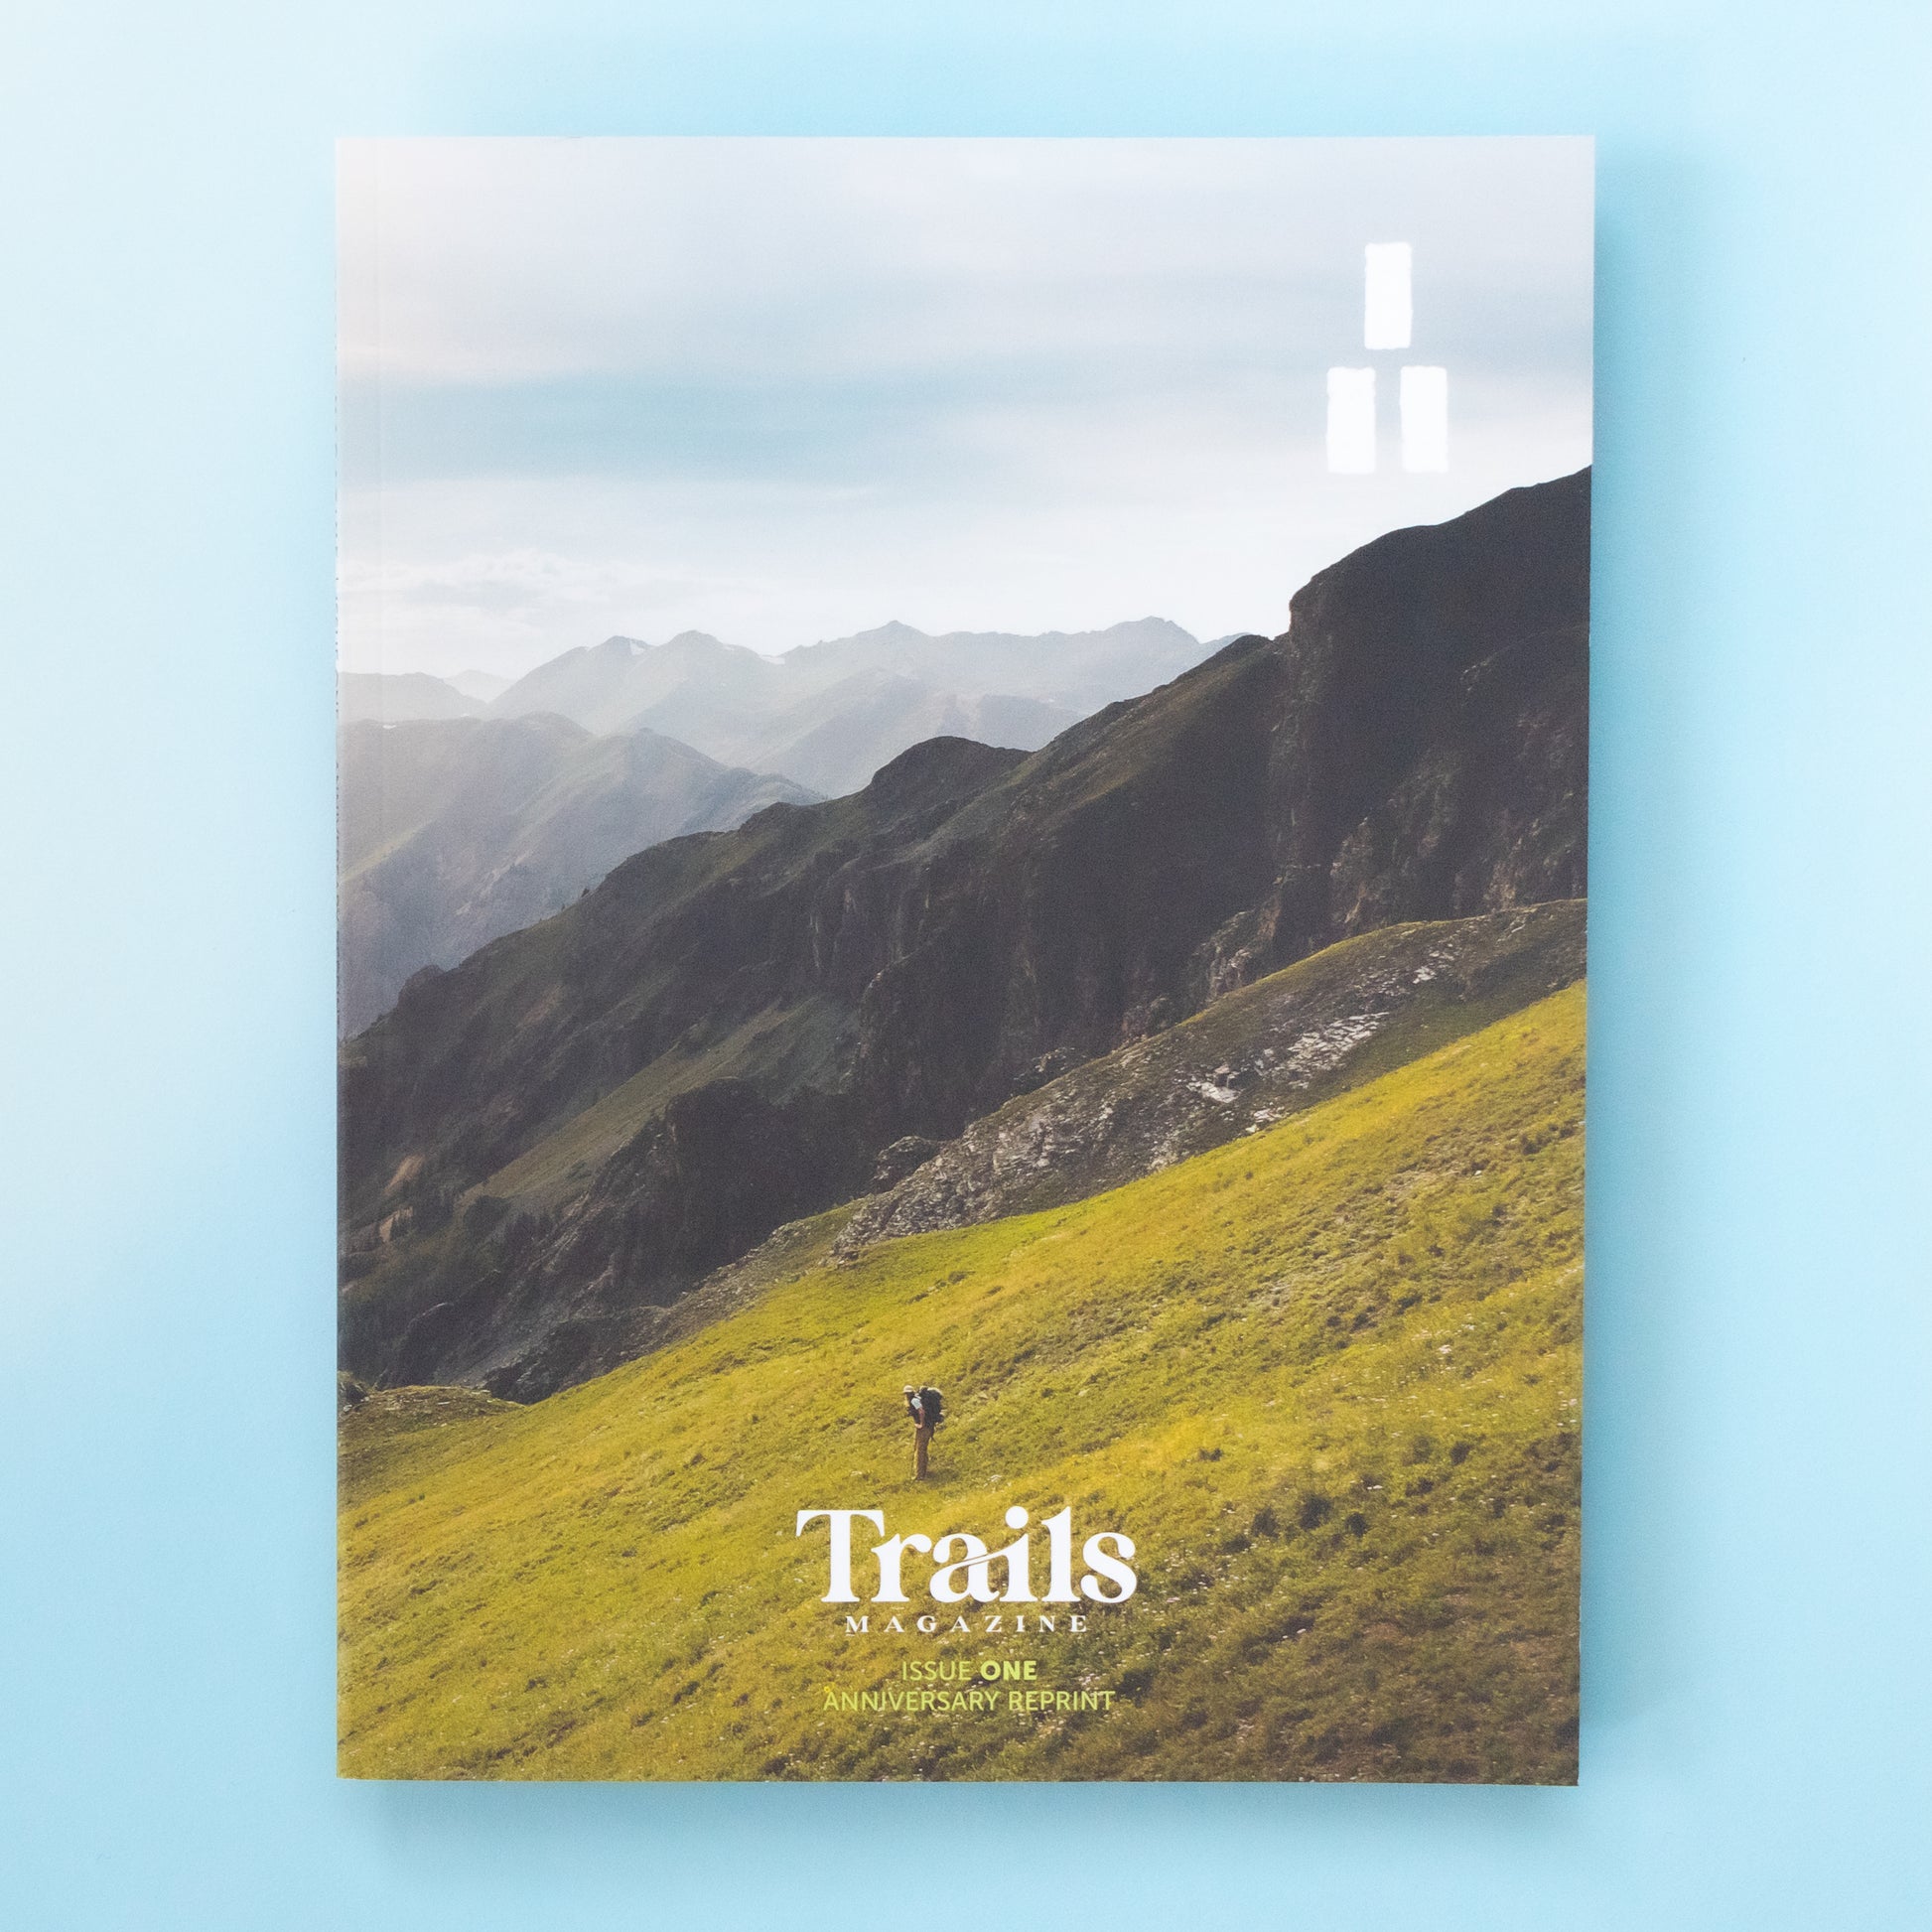 A magazine is over a light blue background. The cover image is of a lush green mountain side with faded peaks off in the distance. In the middle is a person wearing hiking clothes and a backpack hiking downhill. The text "Trails Magazine - Issue One - Anniversary Reprint" is centered at the bottom. In the top right corner is the logo, a set of three thick horizontal lines with two on the bottom and one on top to make a triangle. 